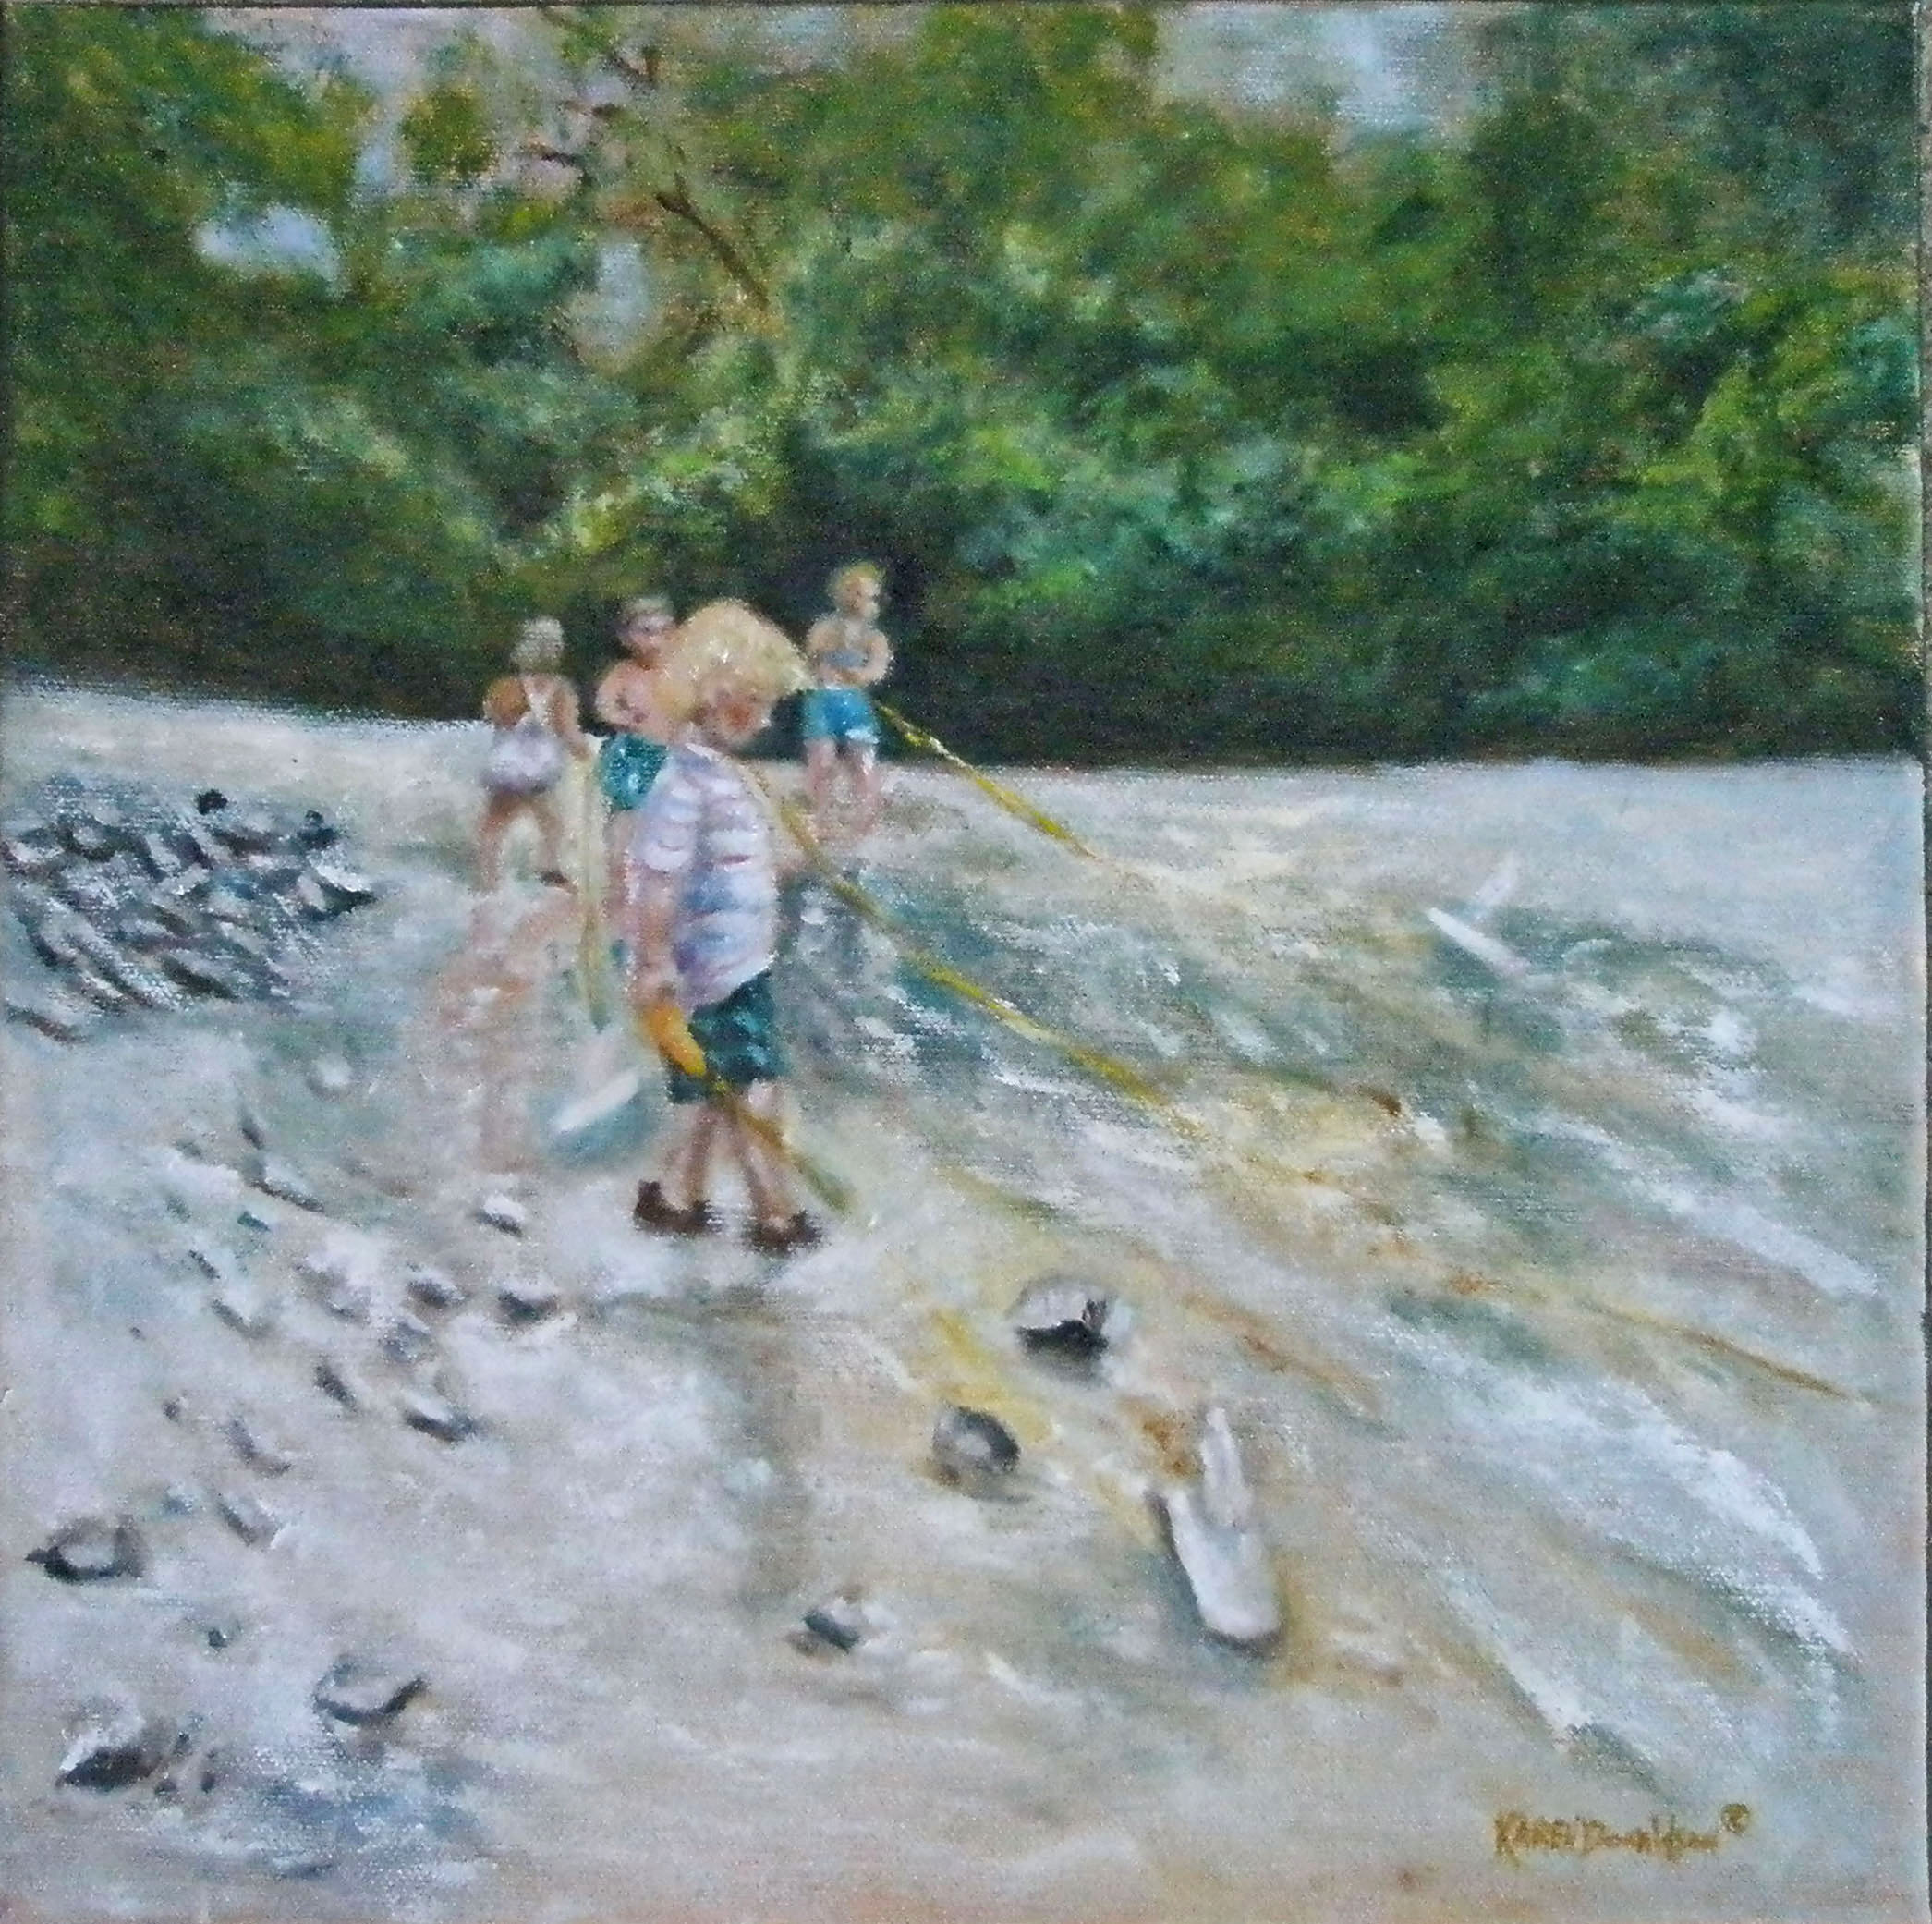 River Play